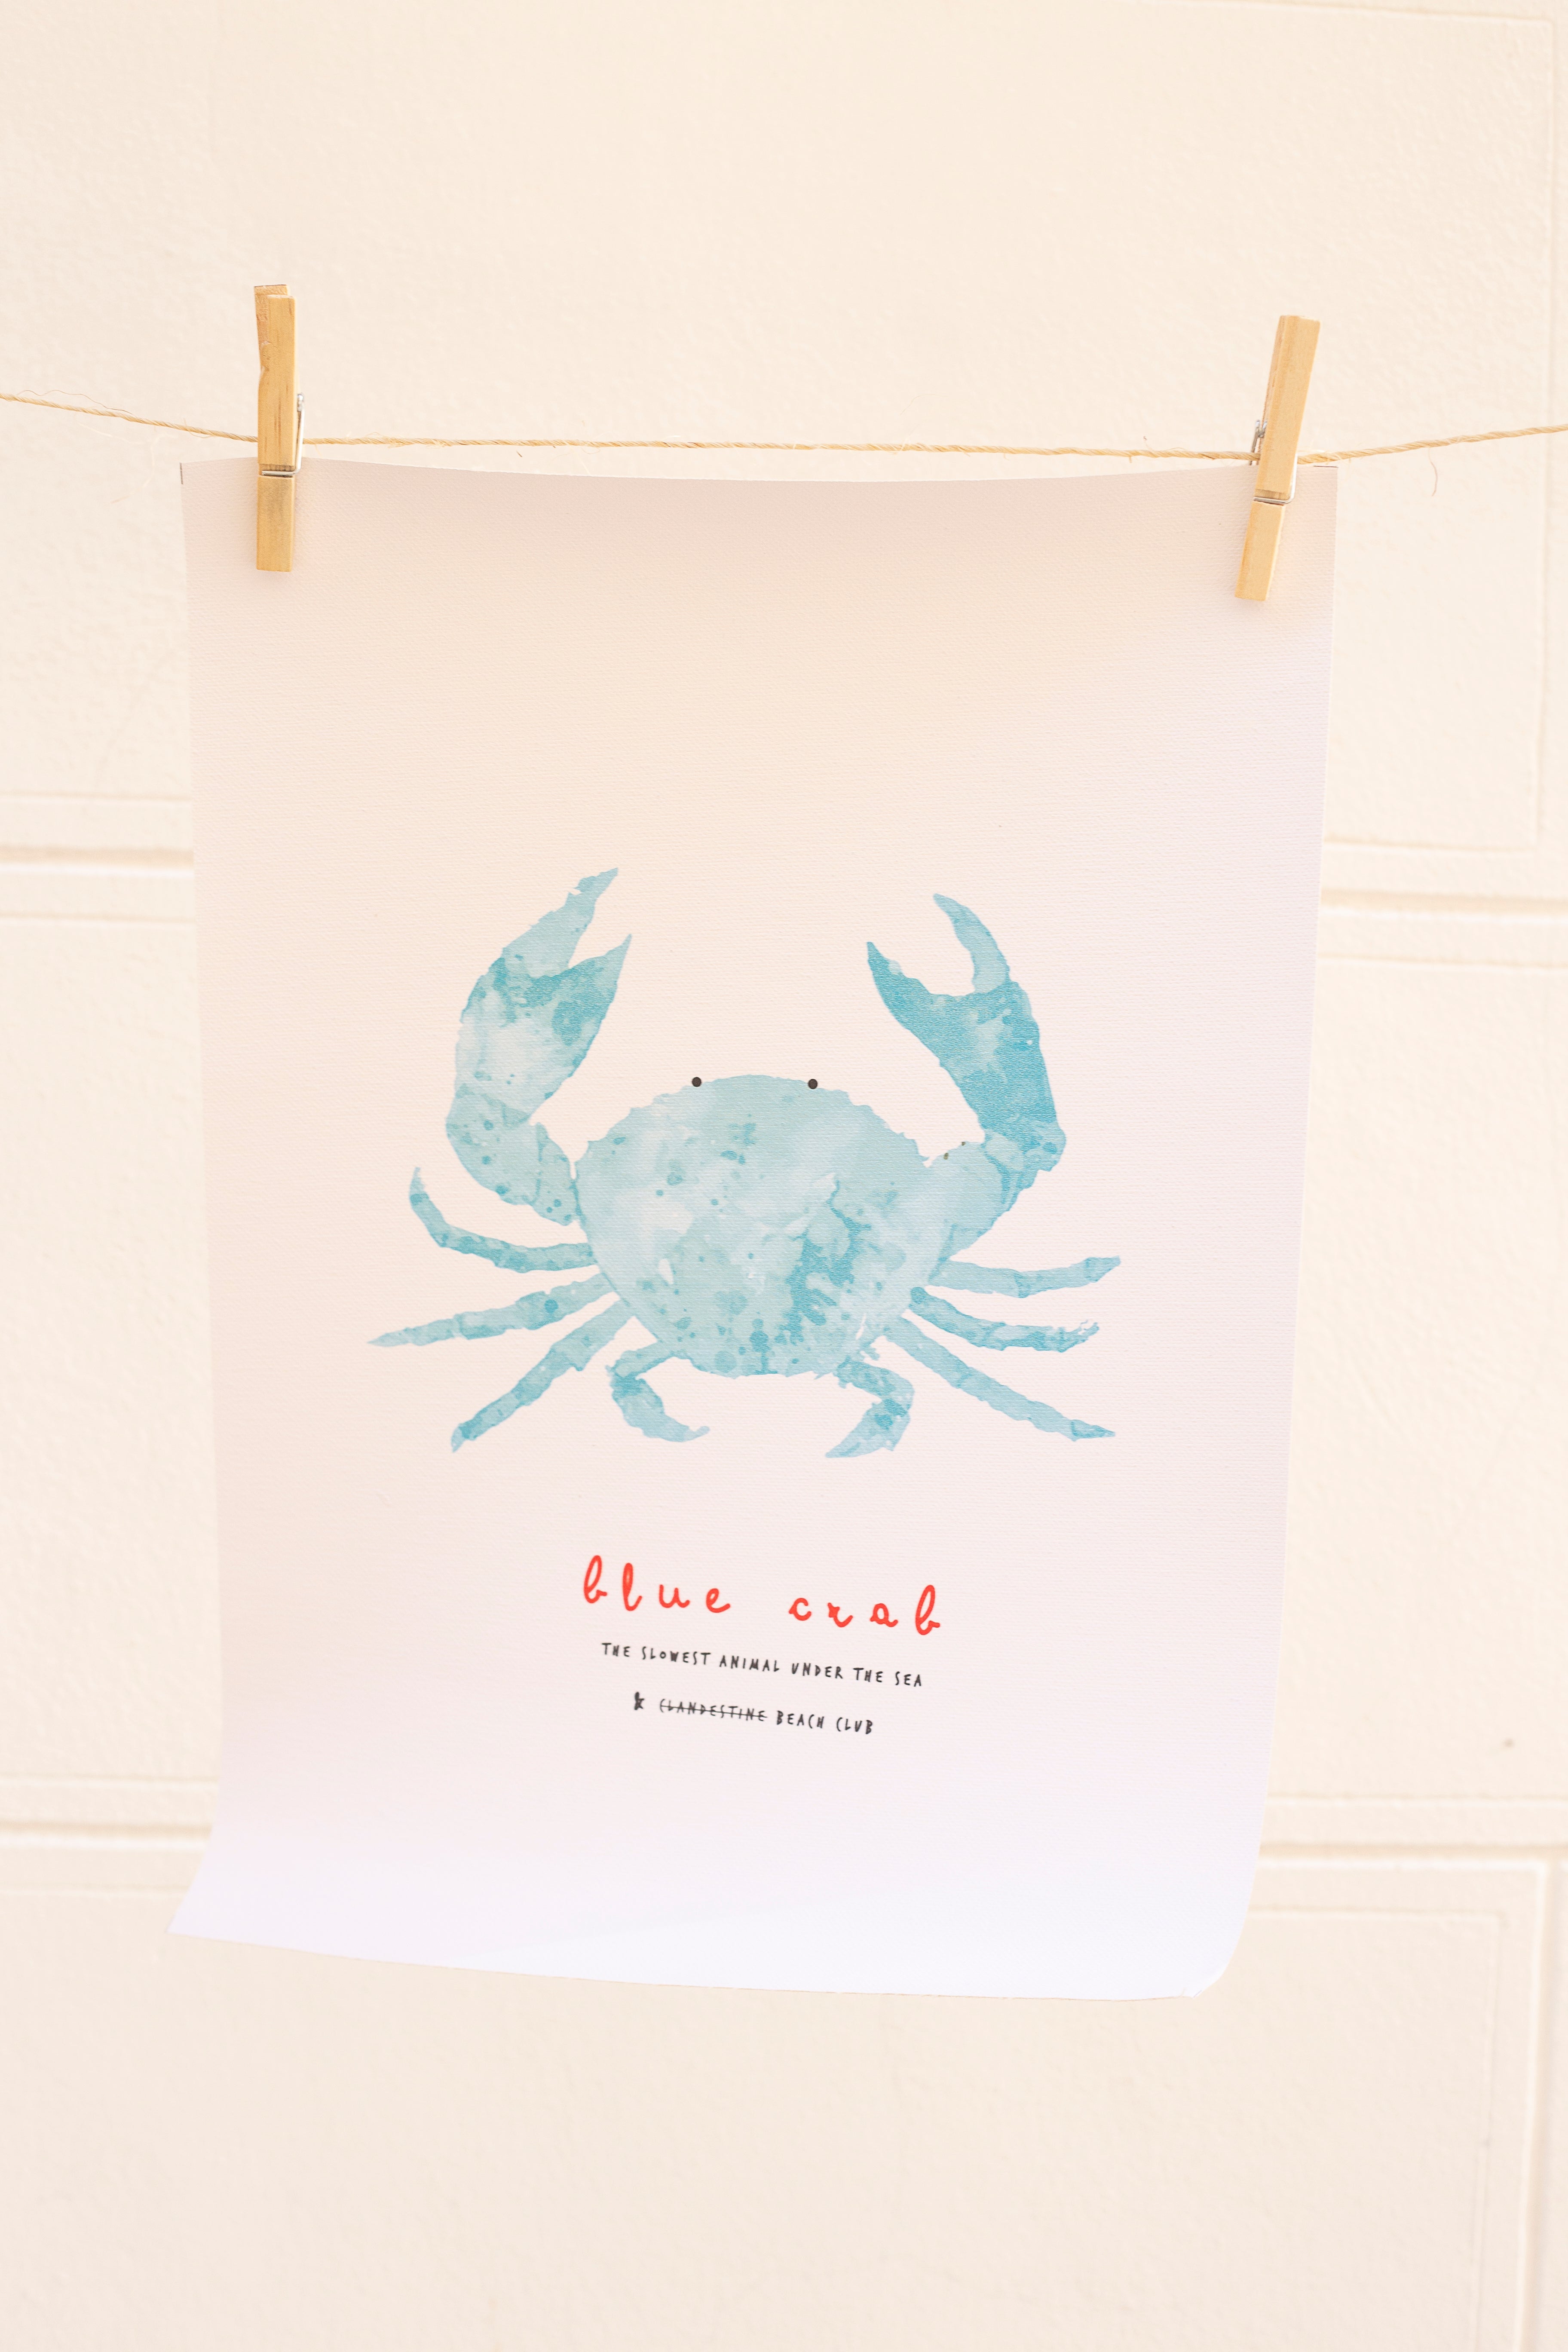 CANVAS LIMITED EDITION BLUE CRAB